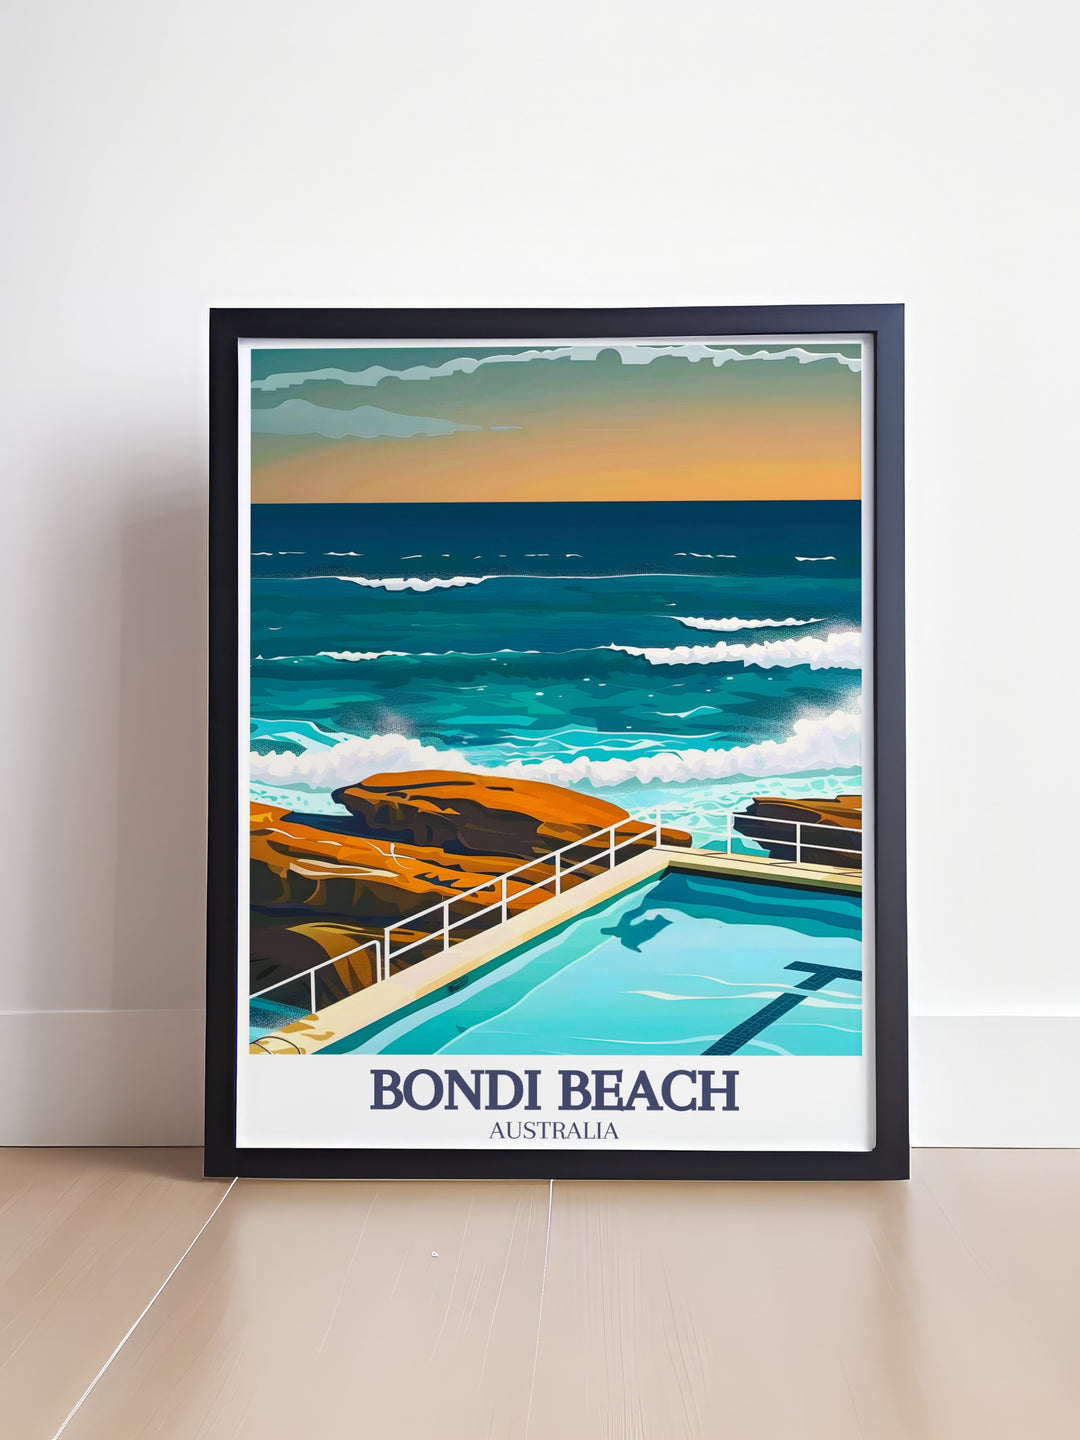 Retro travel poster of Sydney Harbour with detailed illustrations of the Sydney Opera House and Harbour Bridge. Bondi Icebergs pool Bondi digital print adding a splash of color and culture. Ideal for modern art lovers and those who appreciate Australia posters.